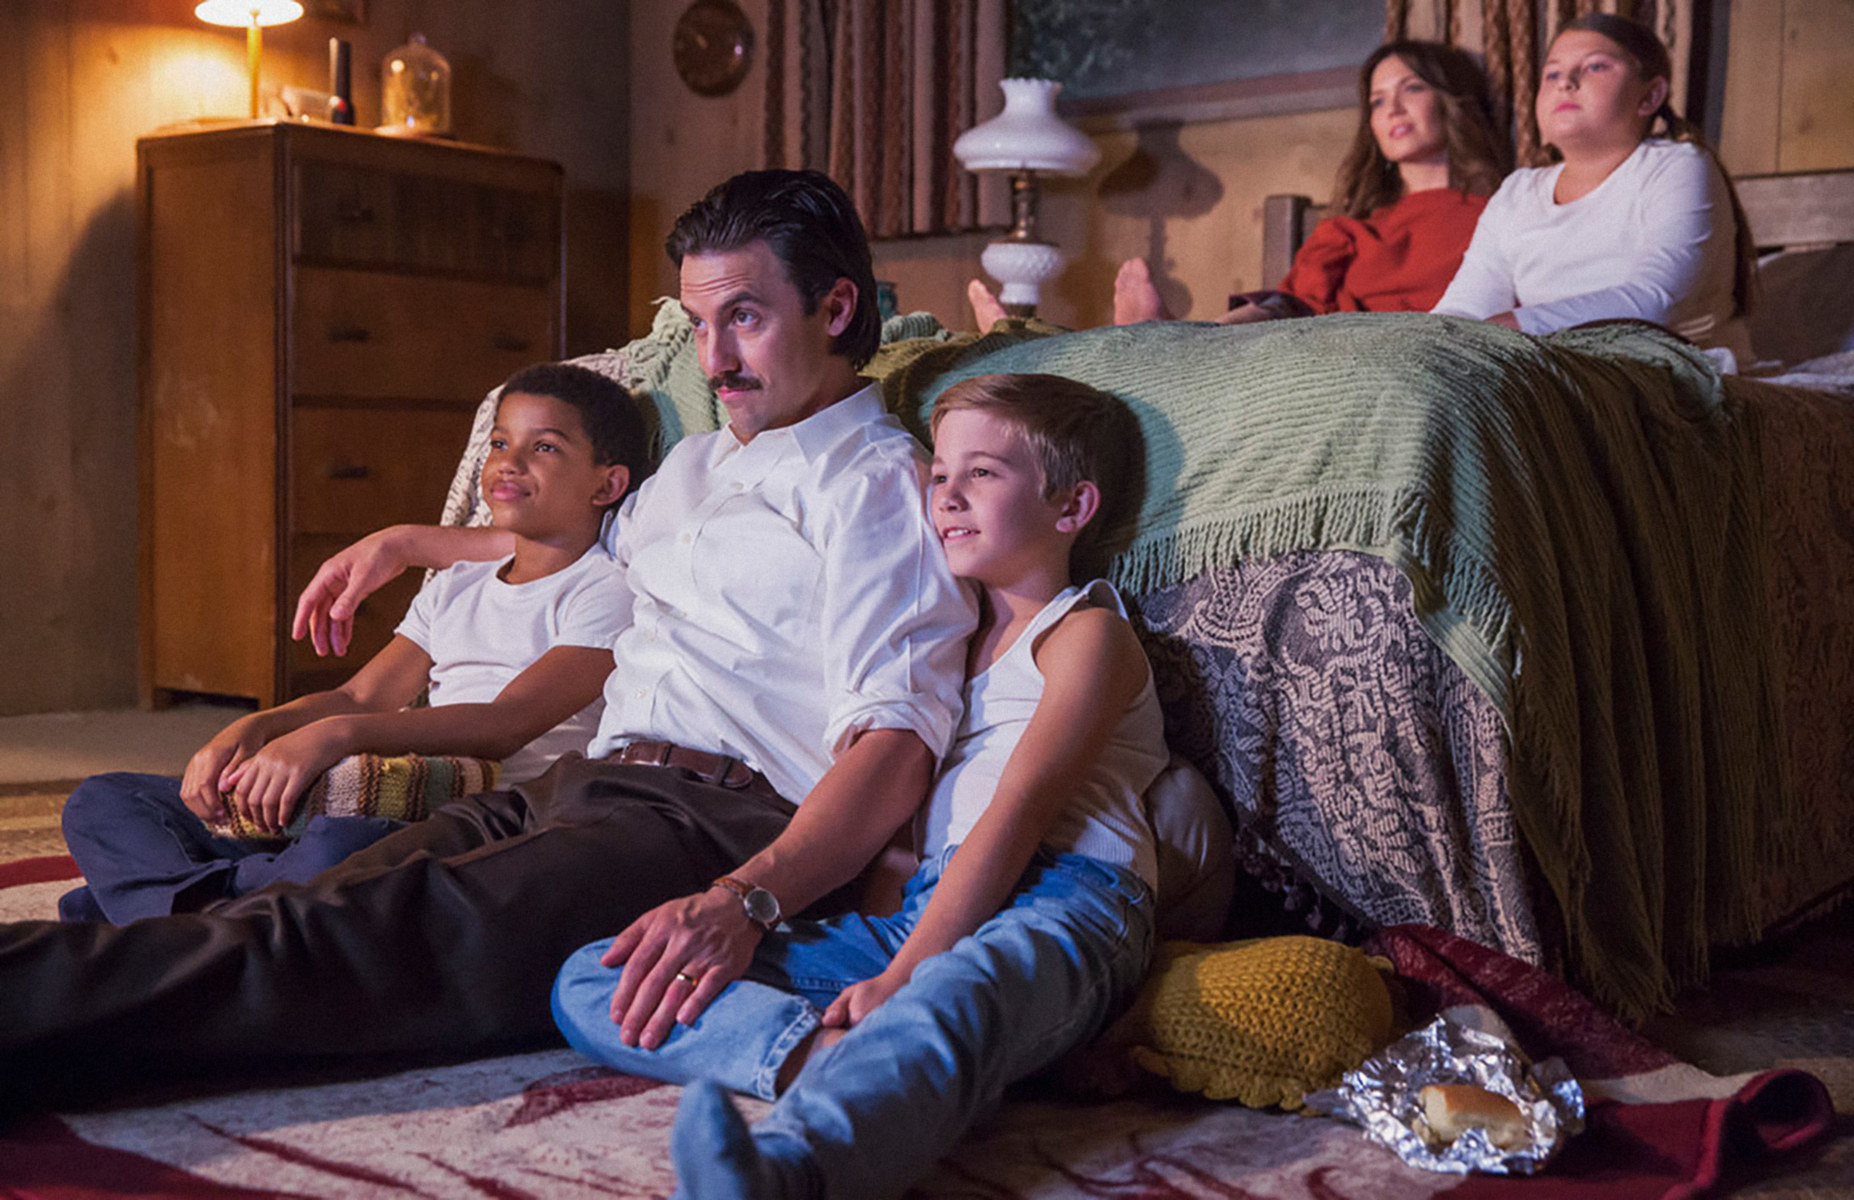 Lonnie Chavis, Milo Ventimiglia, Parker Bates, Mackenzie Hancsicsak, and Mandy Moore watching TV in the bedroom in a scene from This Is Us